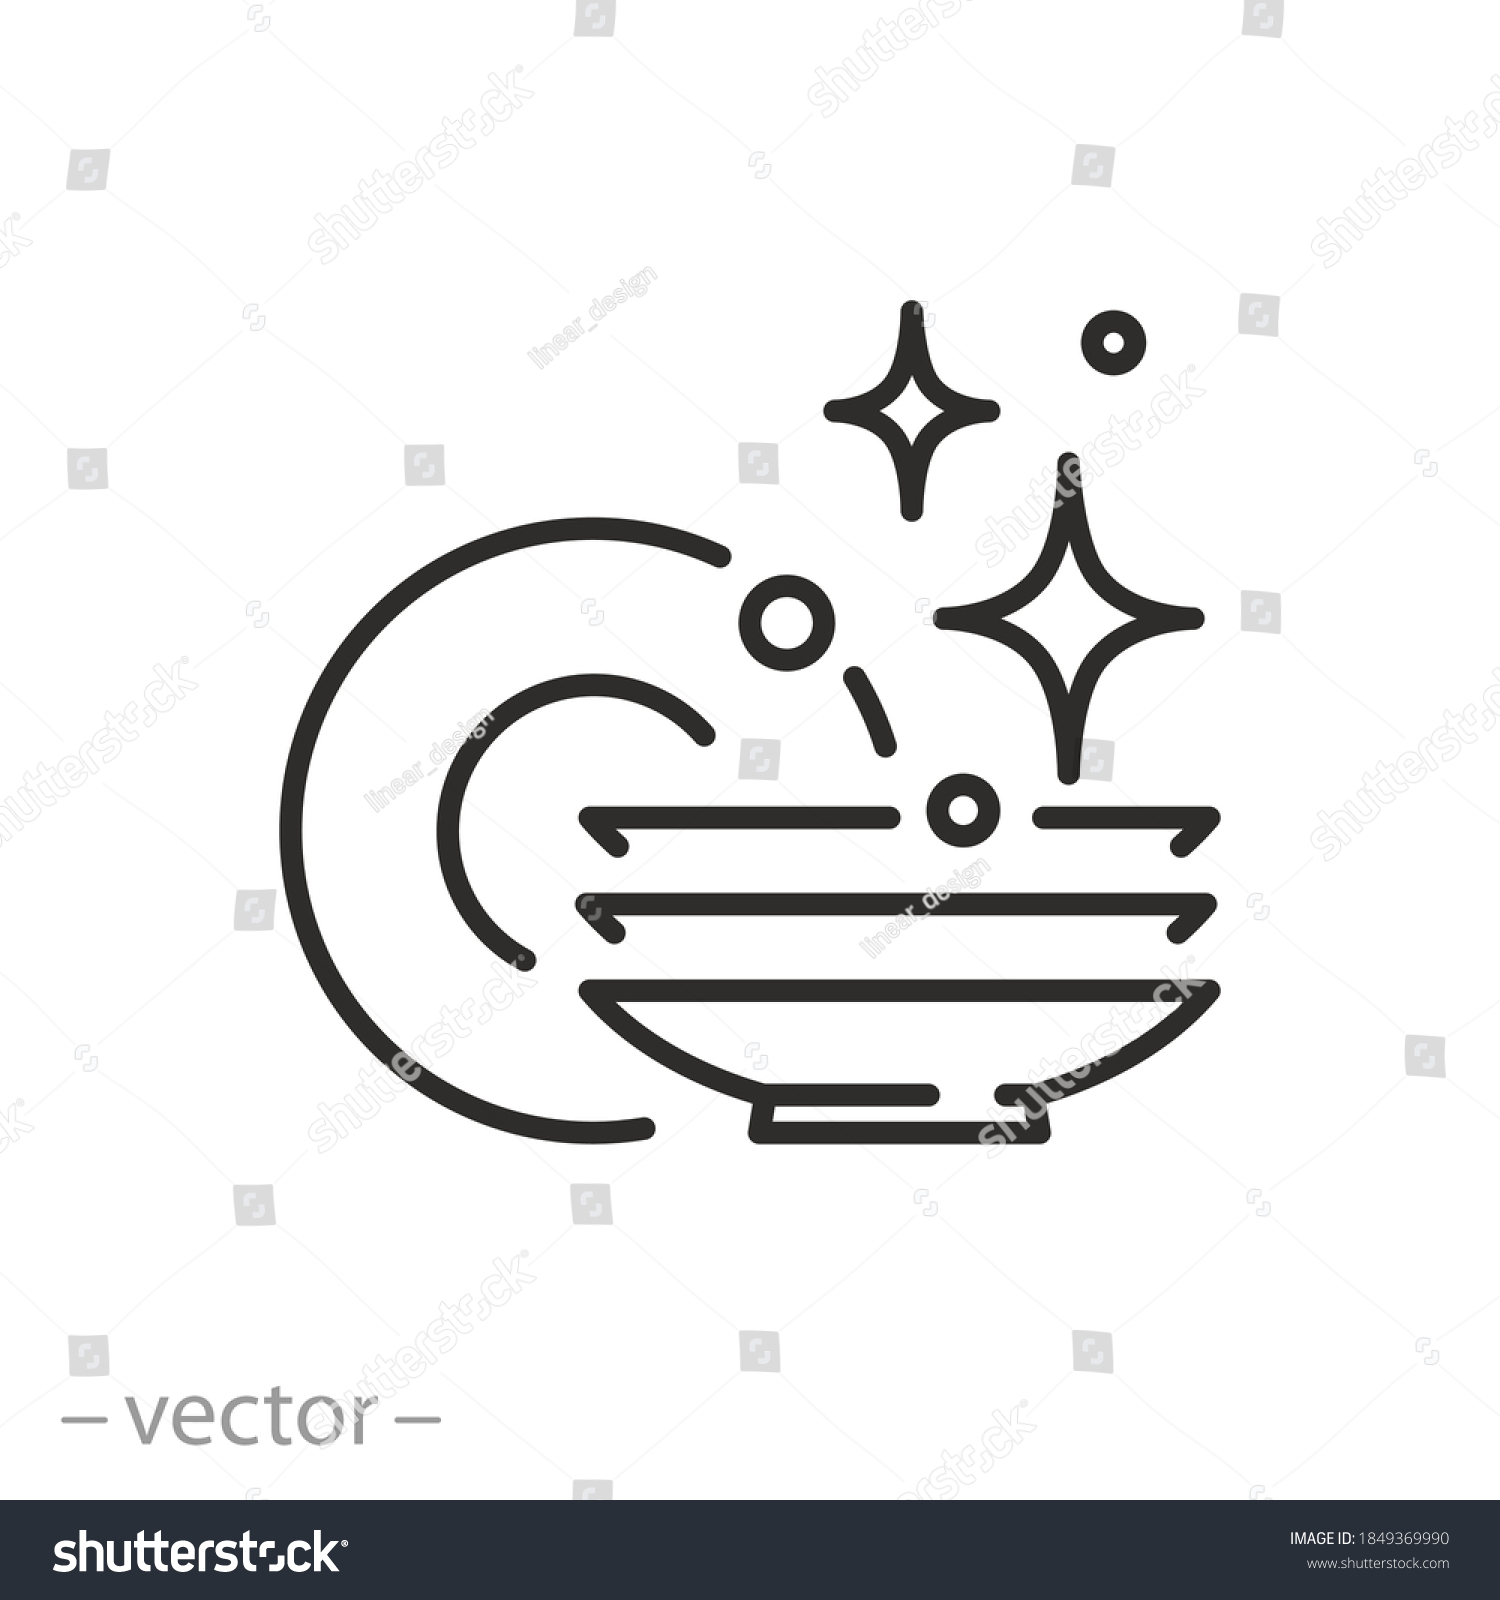 clean dishes icon, shiny plate stack, wash kitchen utensil, pile tableware, thin line symbol on white background - editable stroke vector illustration eps 10 #1849369990